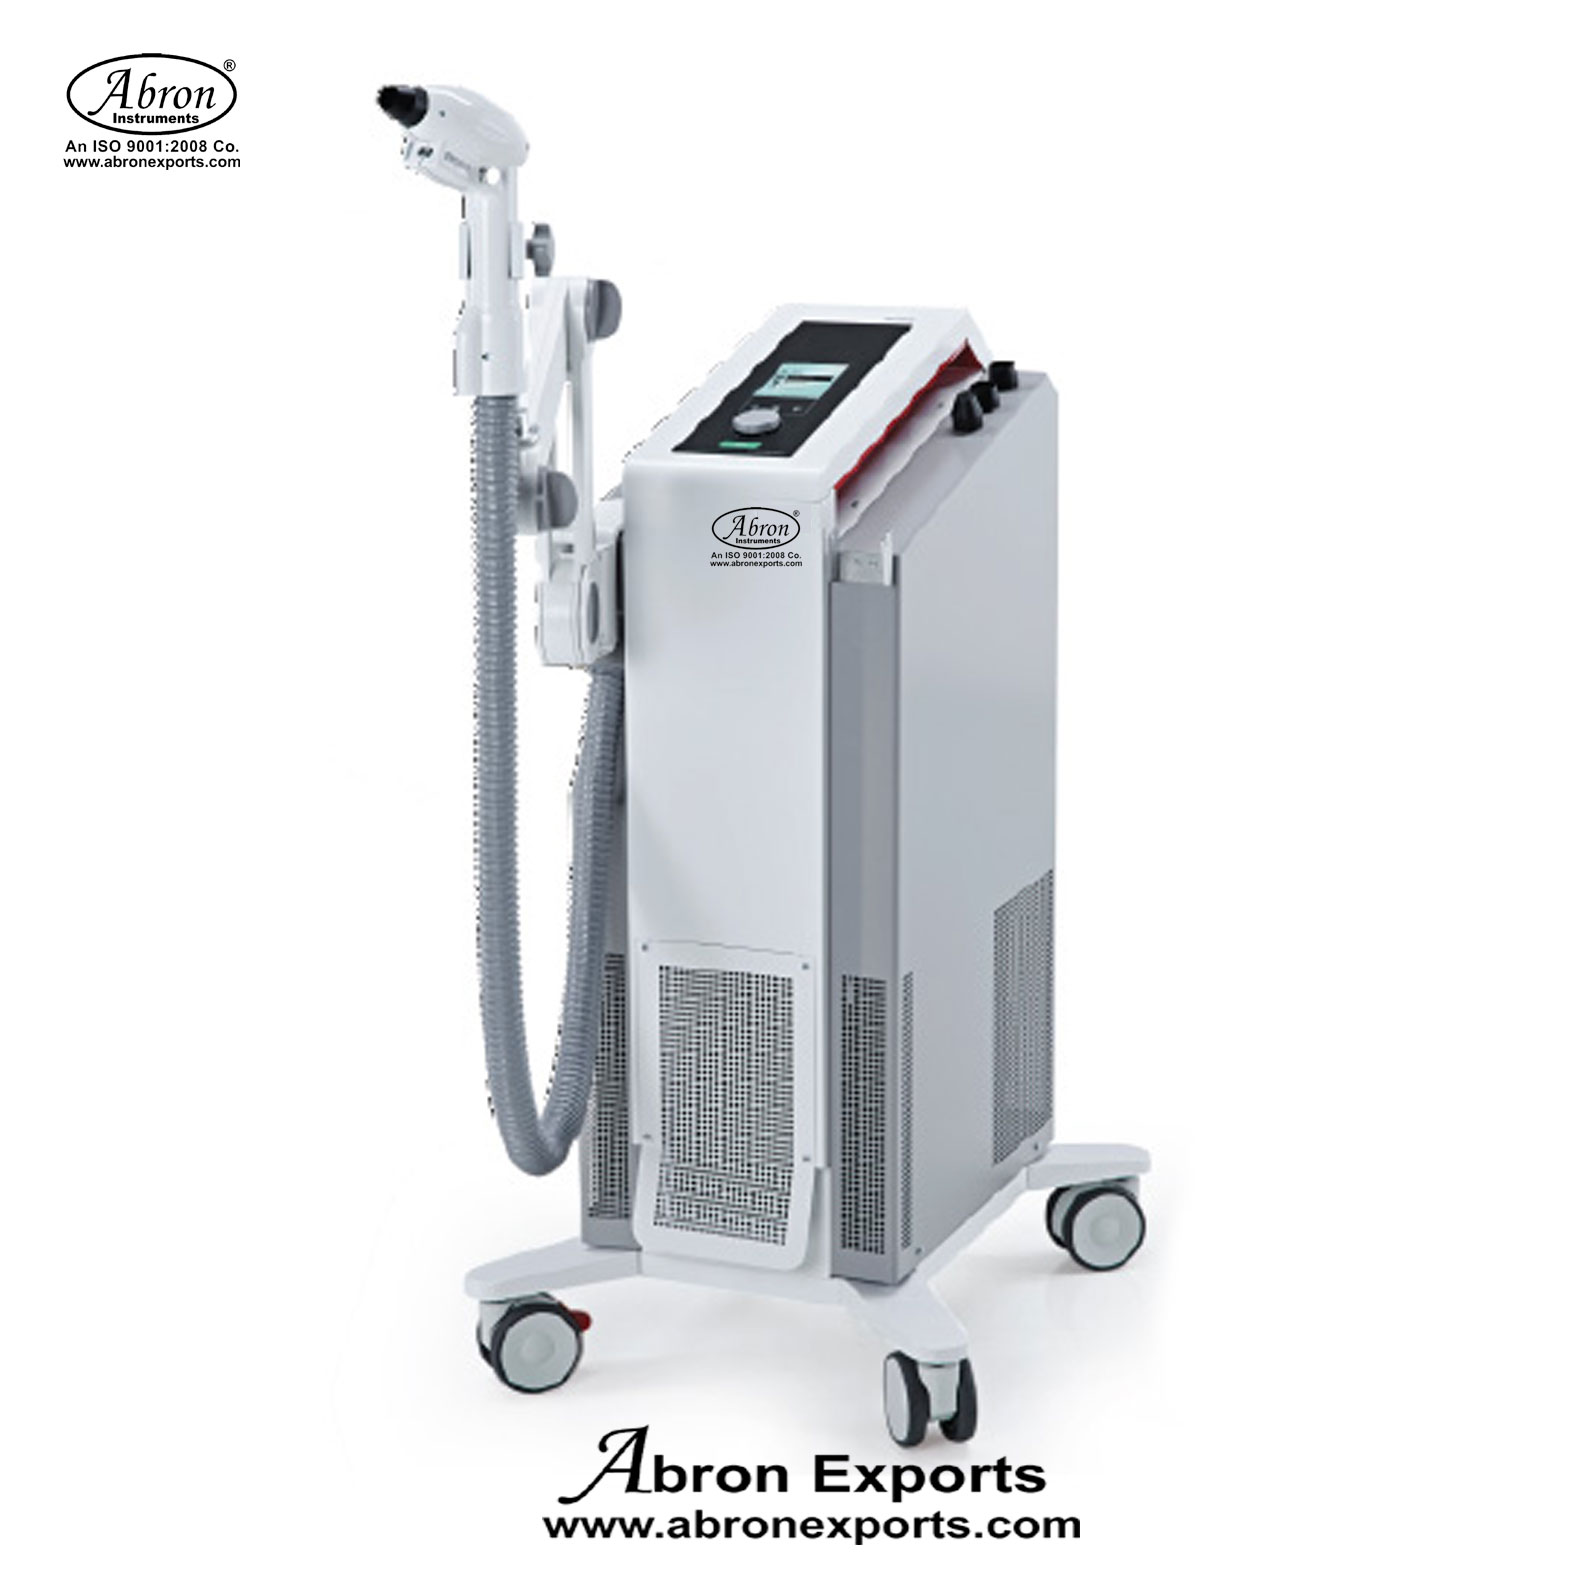 Physiotherapy Clinic Cryoflow Cryotherapy Unit trolley mounted Gymna Uniphy by Abron ABM-1610-CR